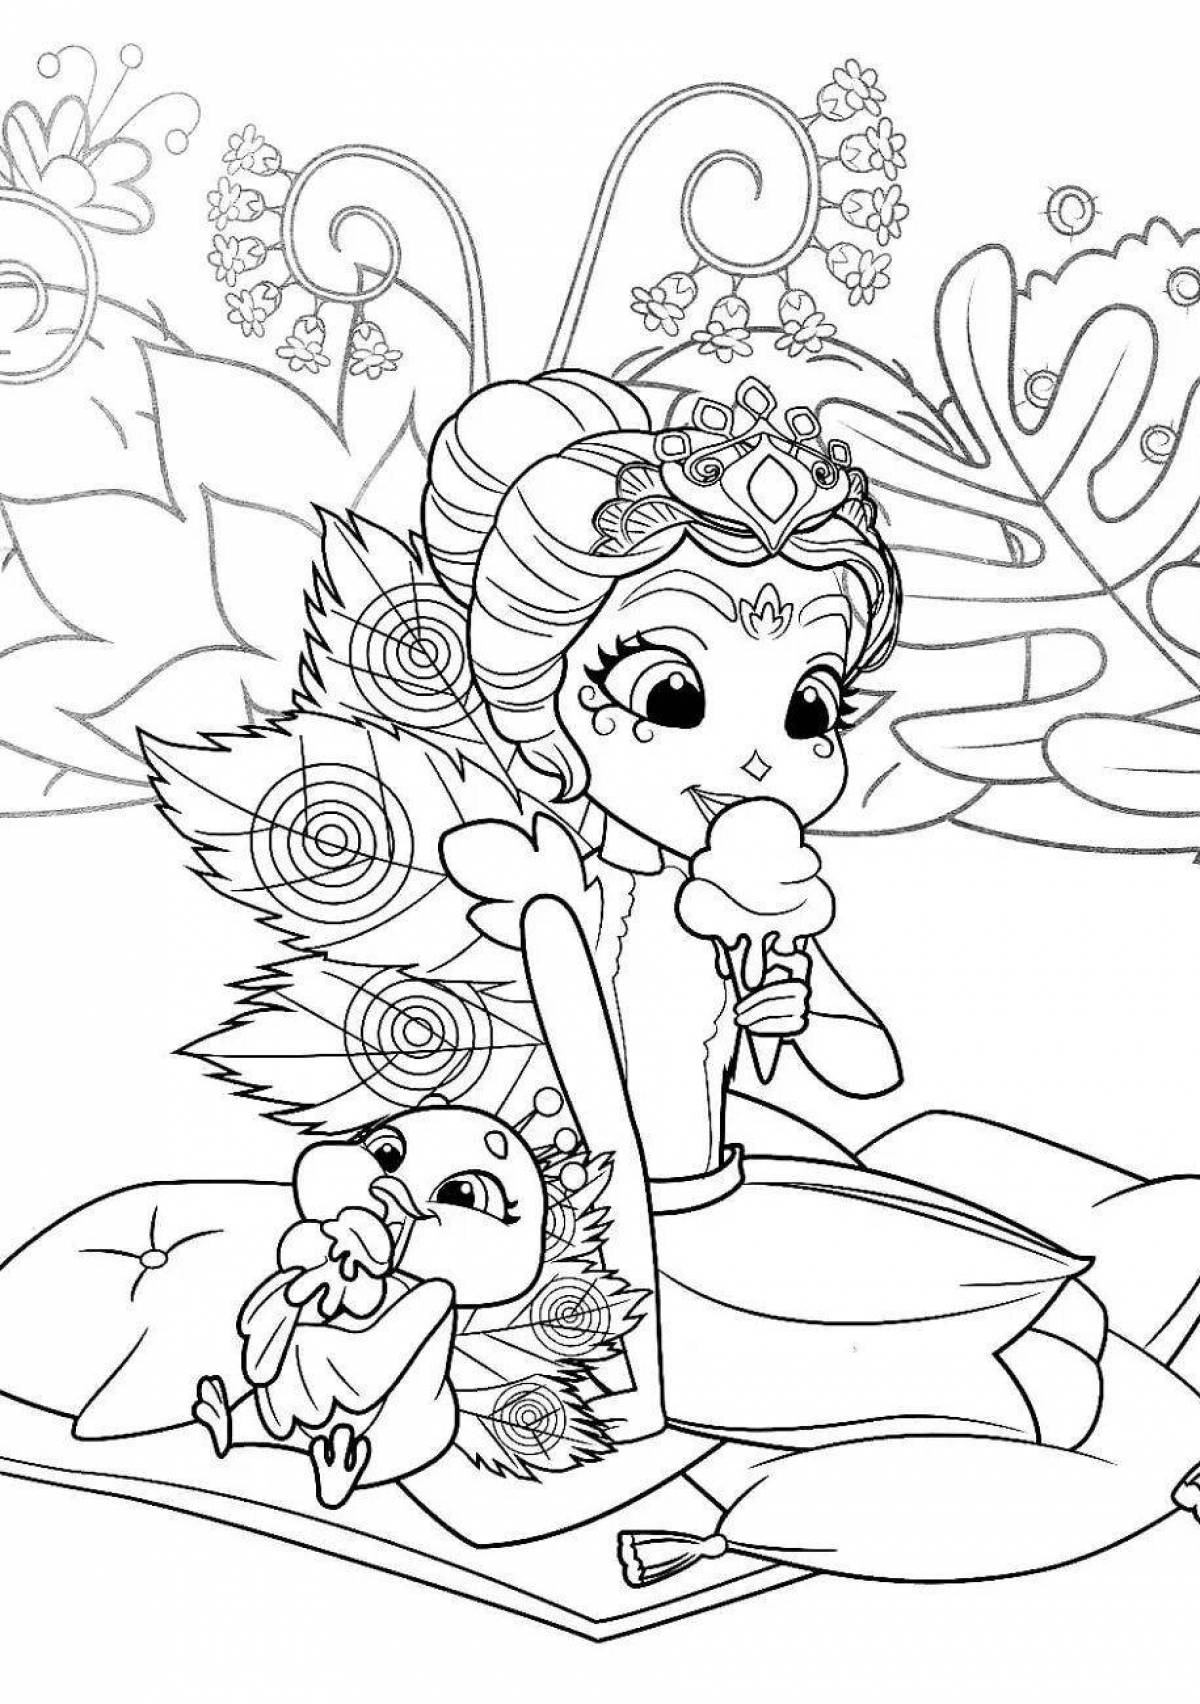 Inchanchimus playful coloring page